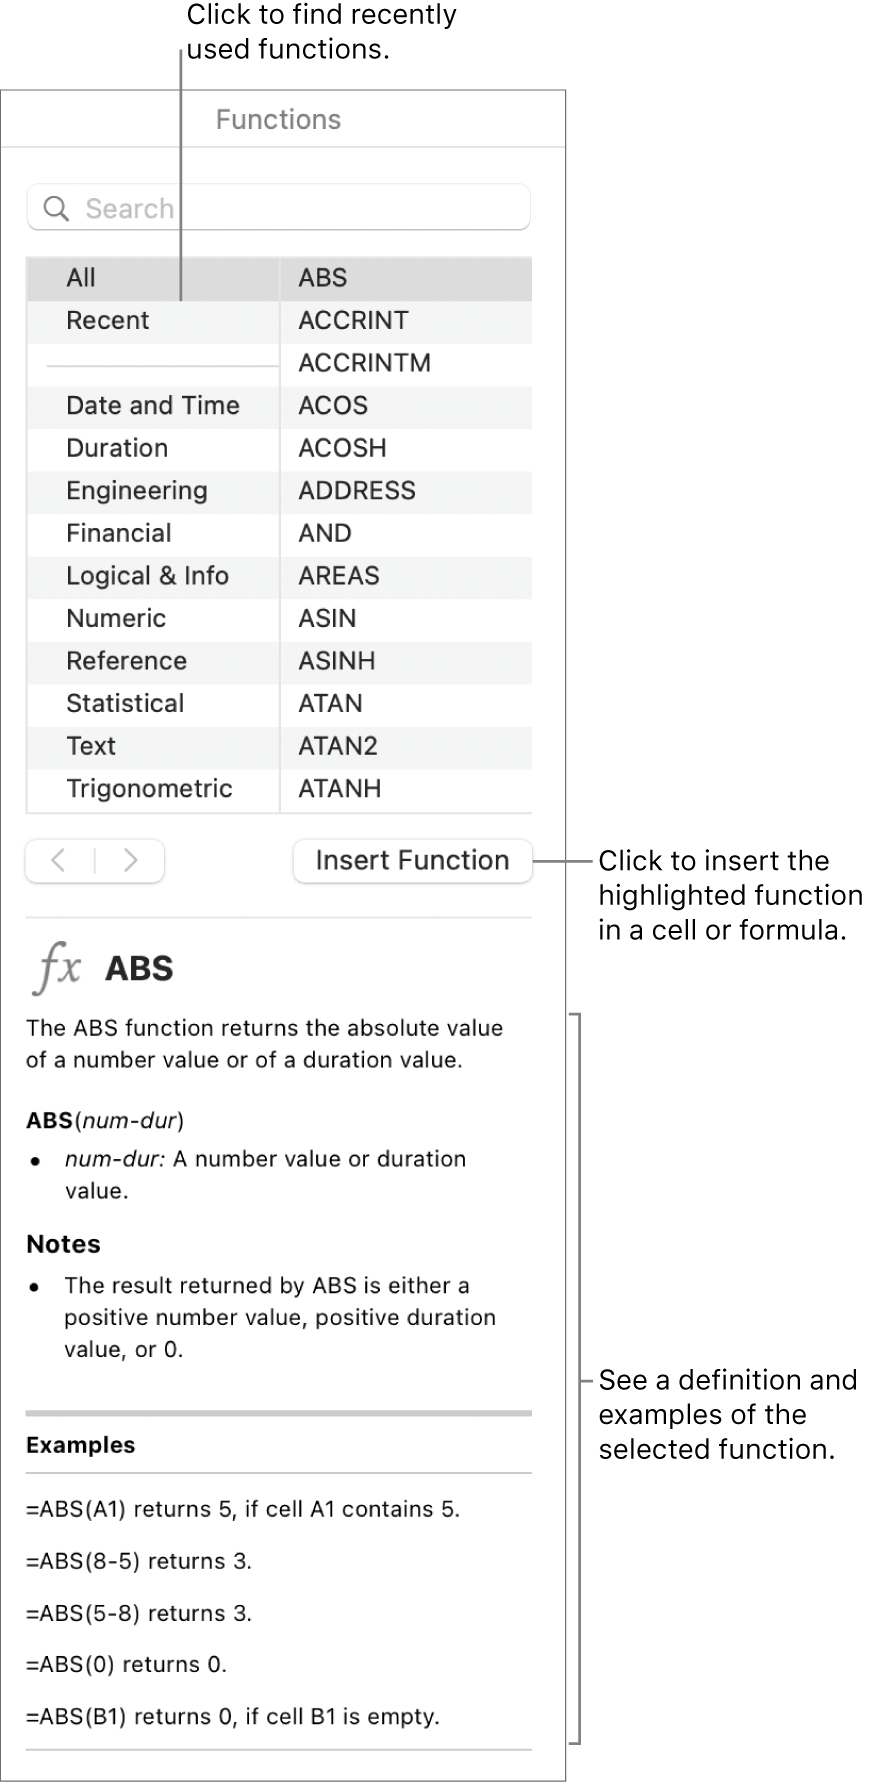 The Function Browser with callouts to recently used functions, the Insert Function button, and the function definition.